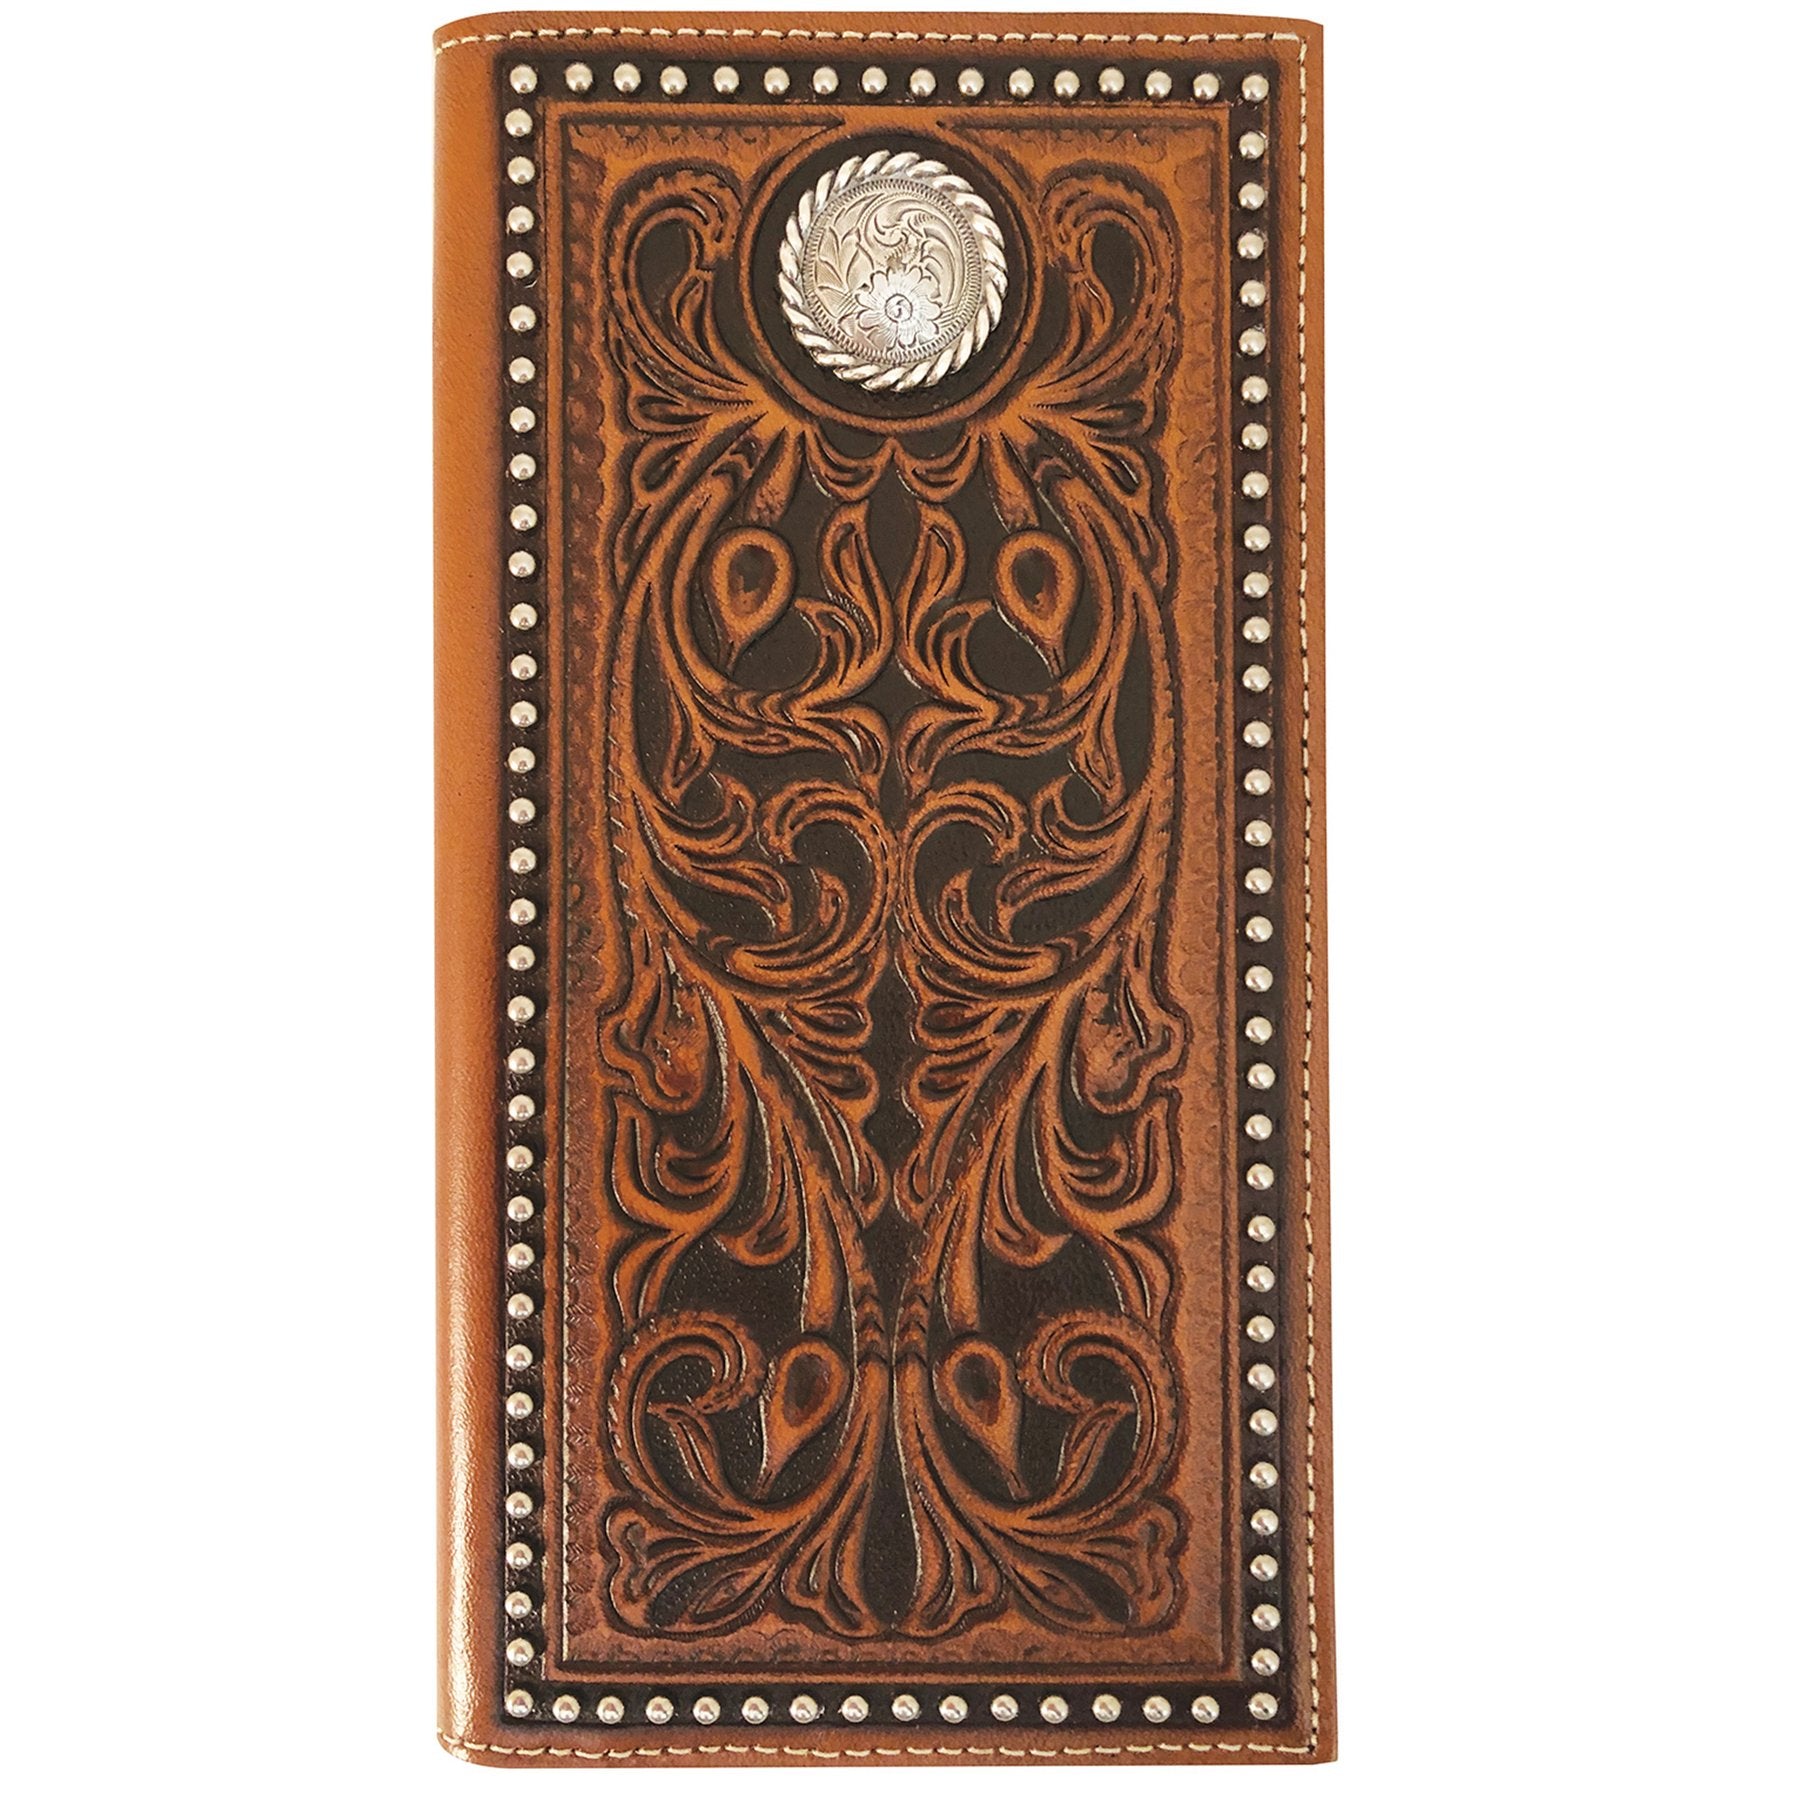 Rodeo Tooled Wallet.